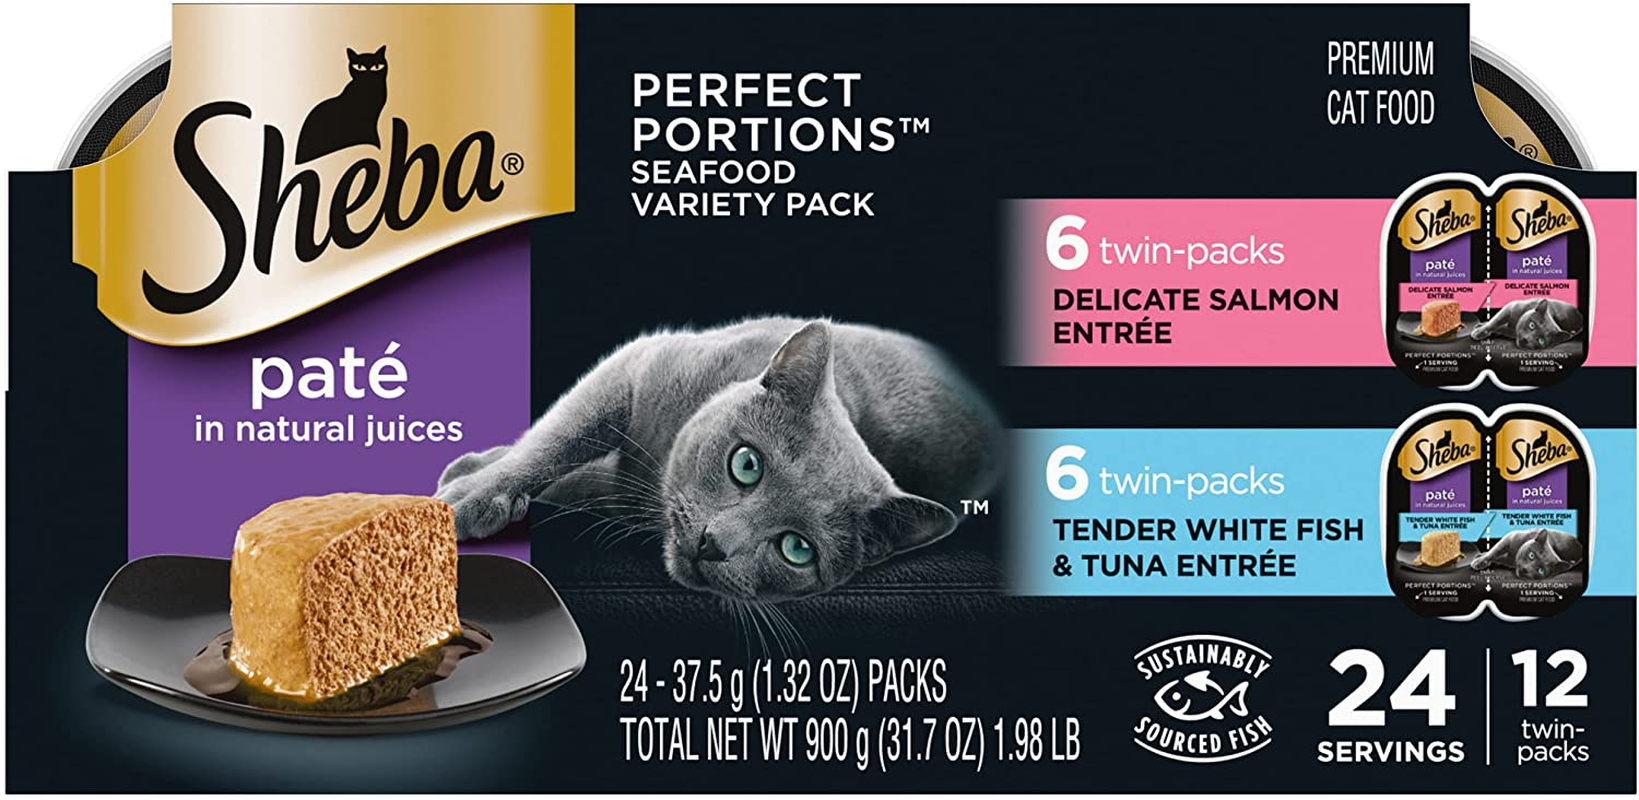 SHEBA PERFECT PORTIONS Wet Cat Food Paté in Natural Juices Savory Chicken, Roasted Turkey, & Tender Beef Entrées Variety Pack, (24) 2.6 Oz. Twin-Pack Trays